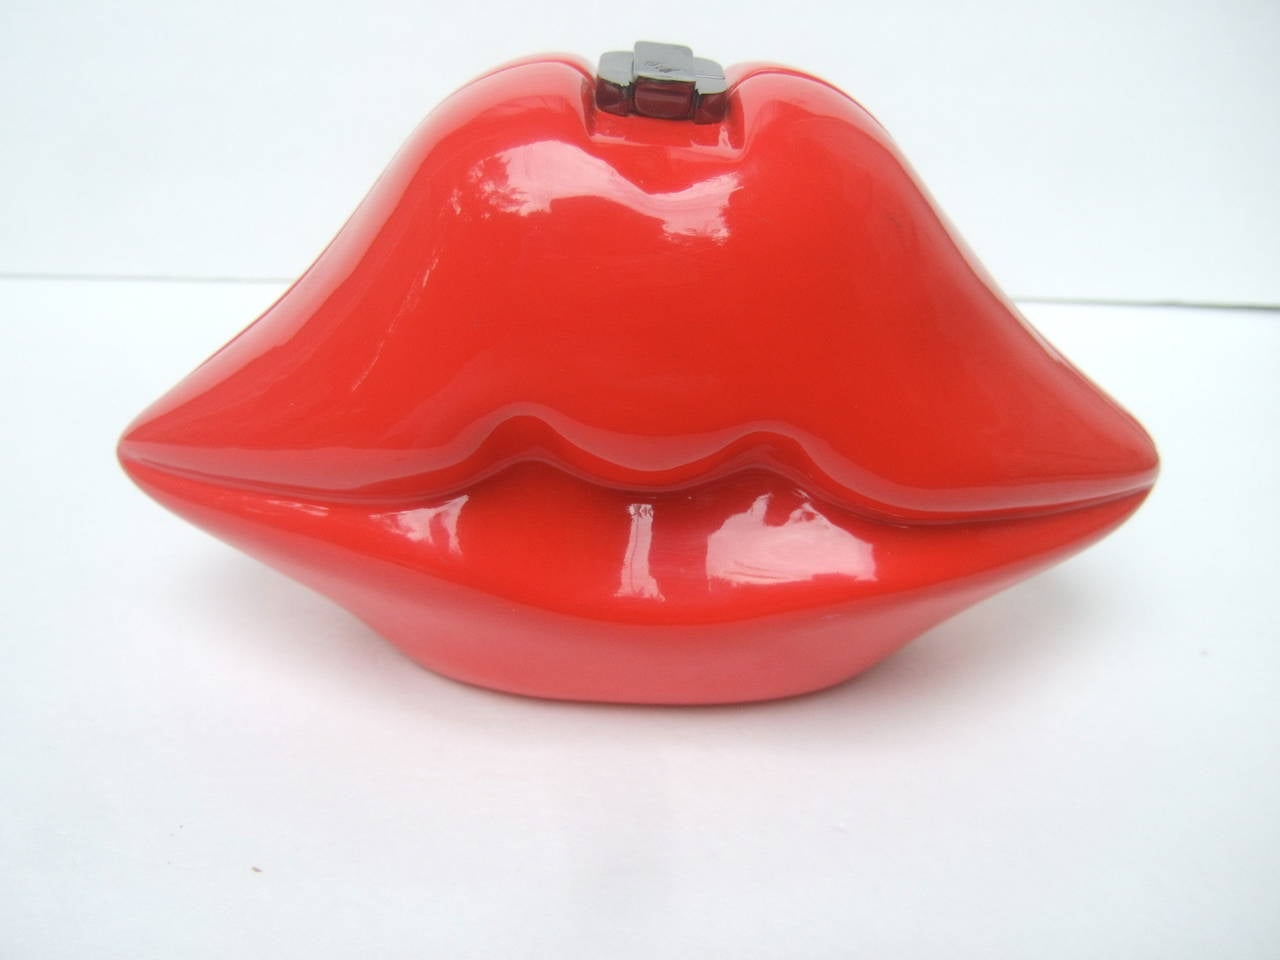 Timmy Woods Beverly Hills luscious red enamel lips handbag
The mod style artisan handbag is designed with hand carved 
wood from fallen acacia tress in the Philippines

The bold puckered lips are lacquered with bright red enamel 
that has a